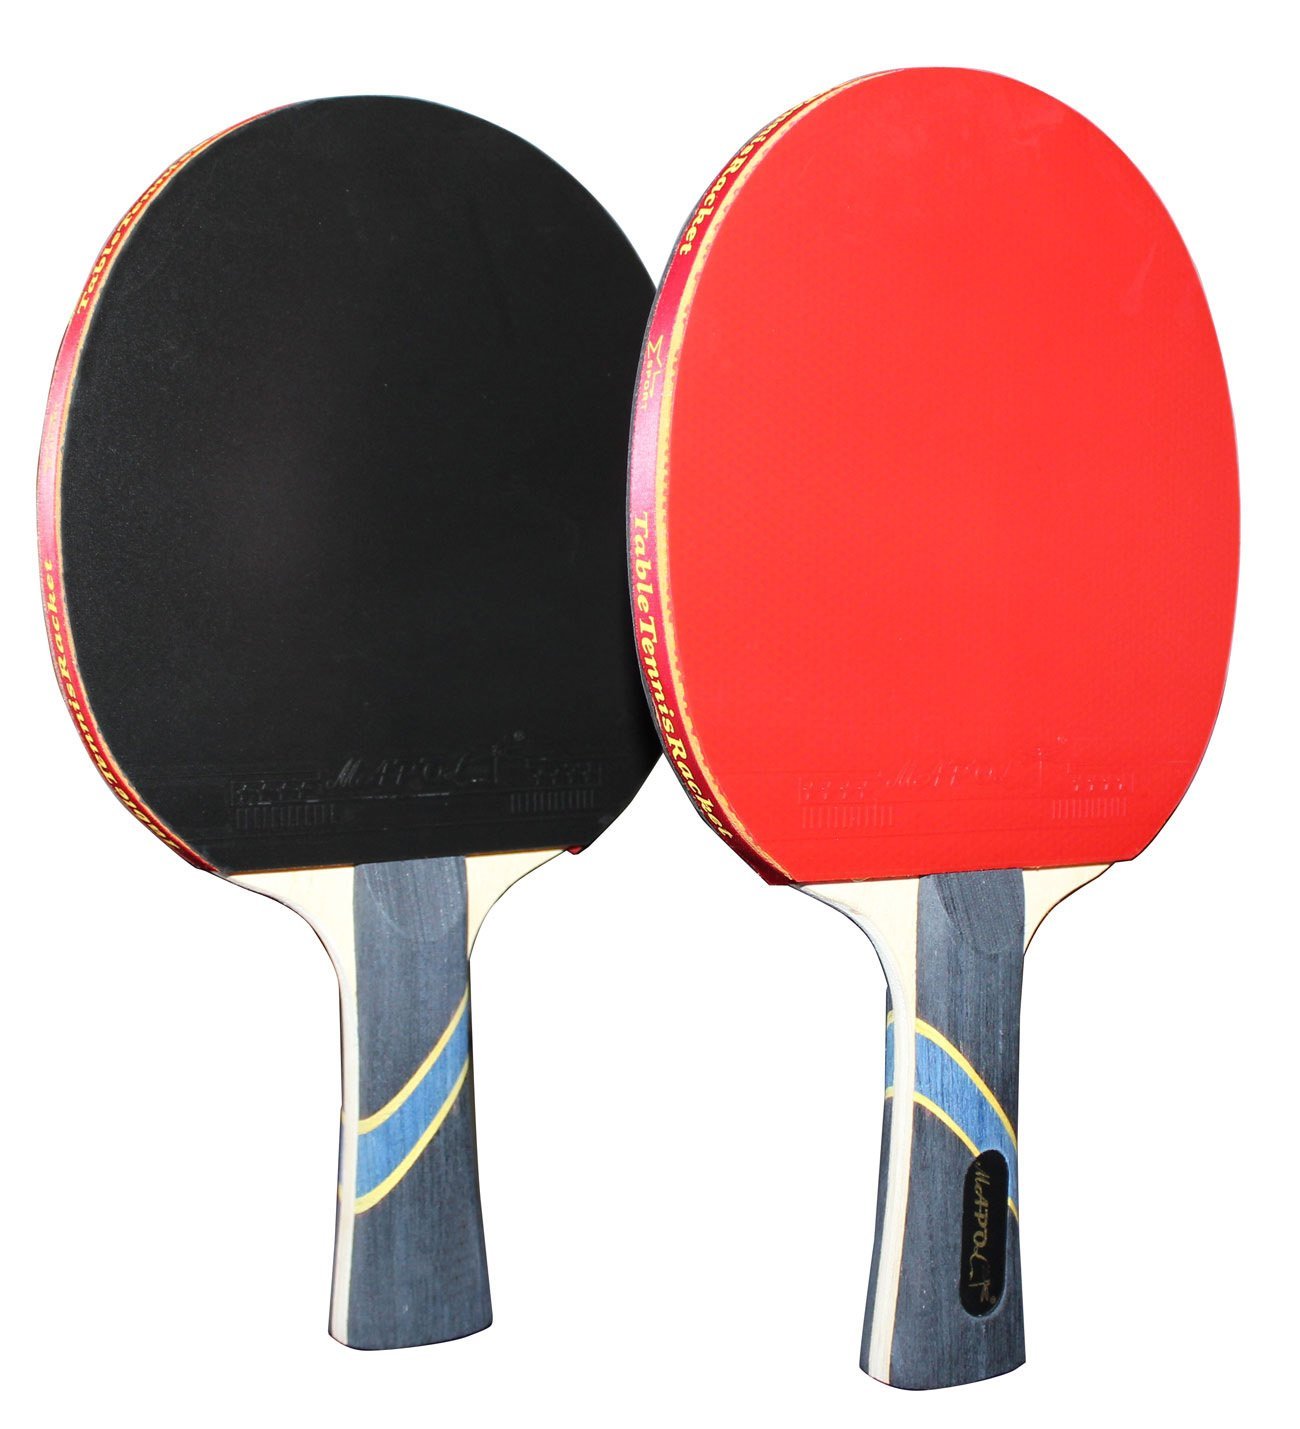 MAPOL 4 Star Professional Ping Pong Paddle Advanced Training Table Tennis Racket With Carry Case